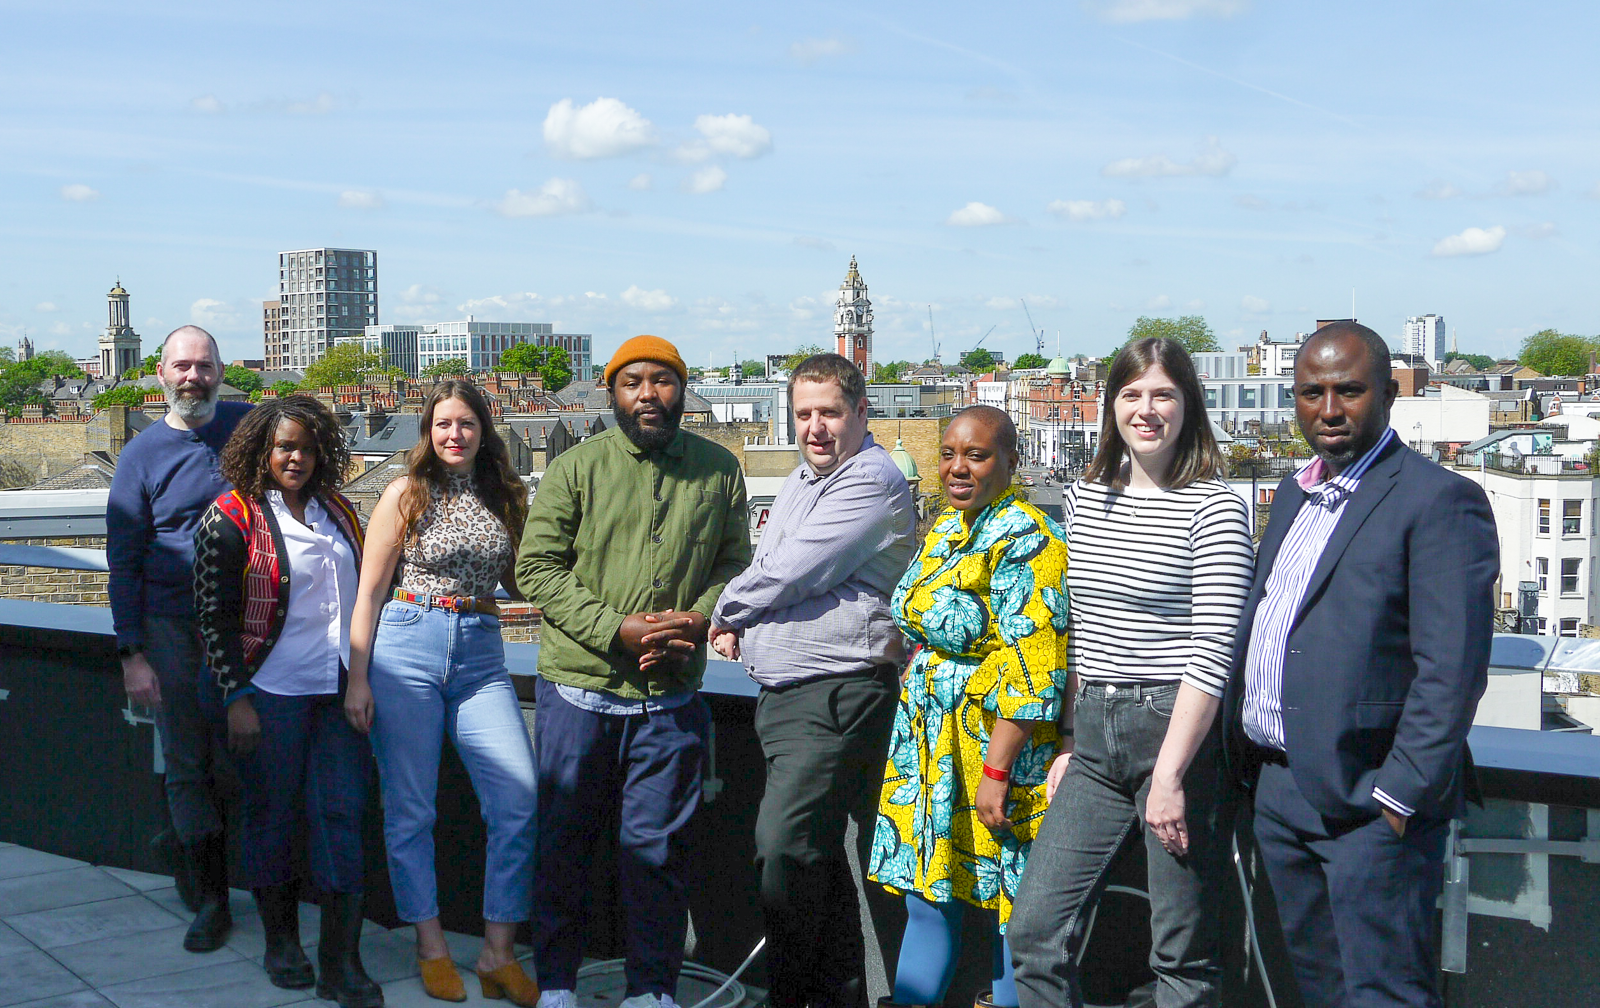 Brixton House team on the roof of the building